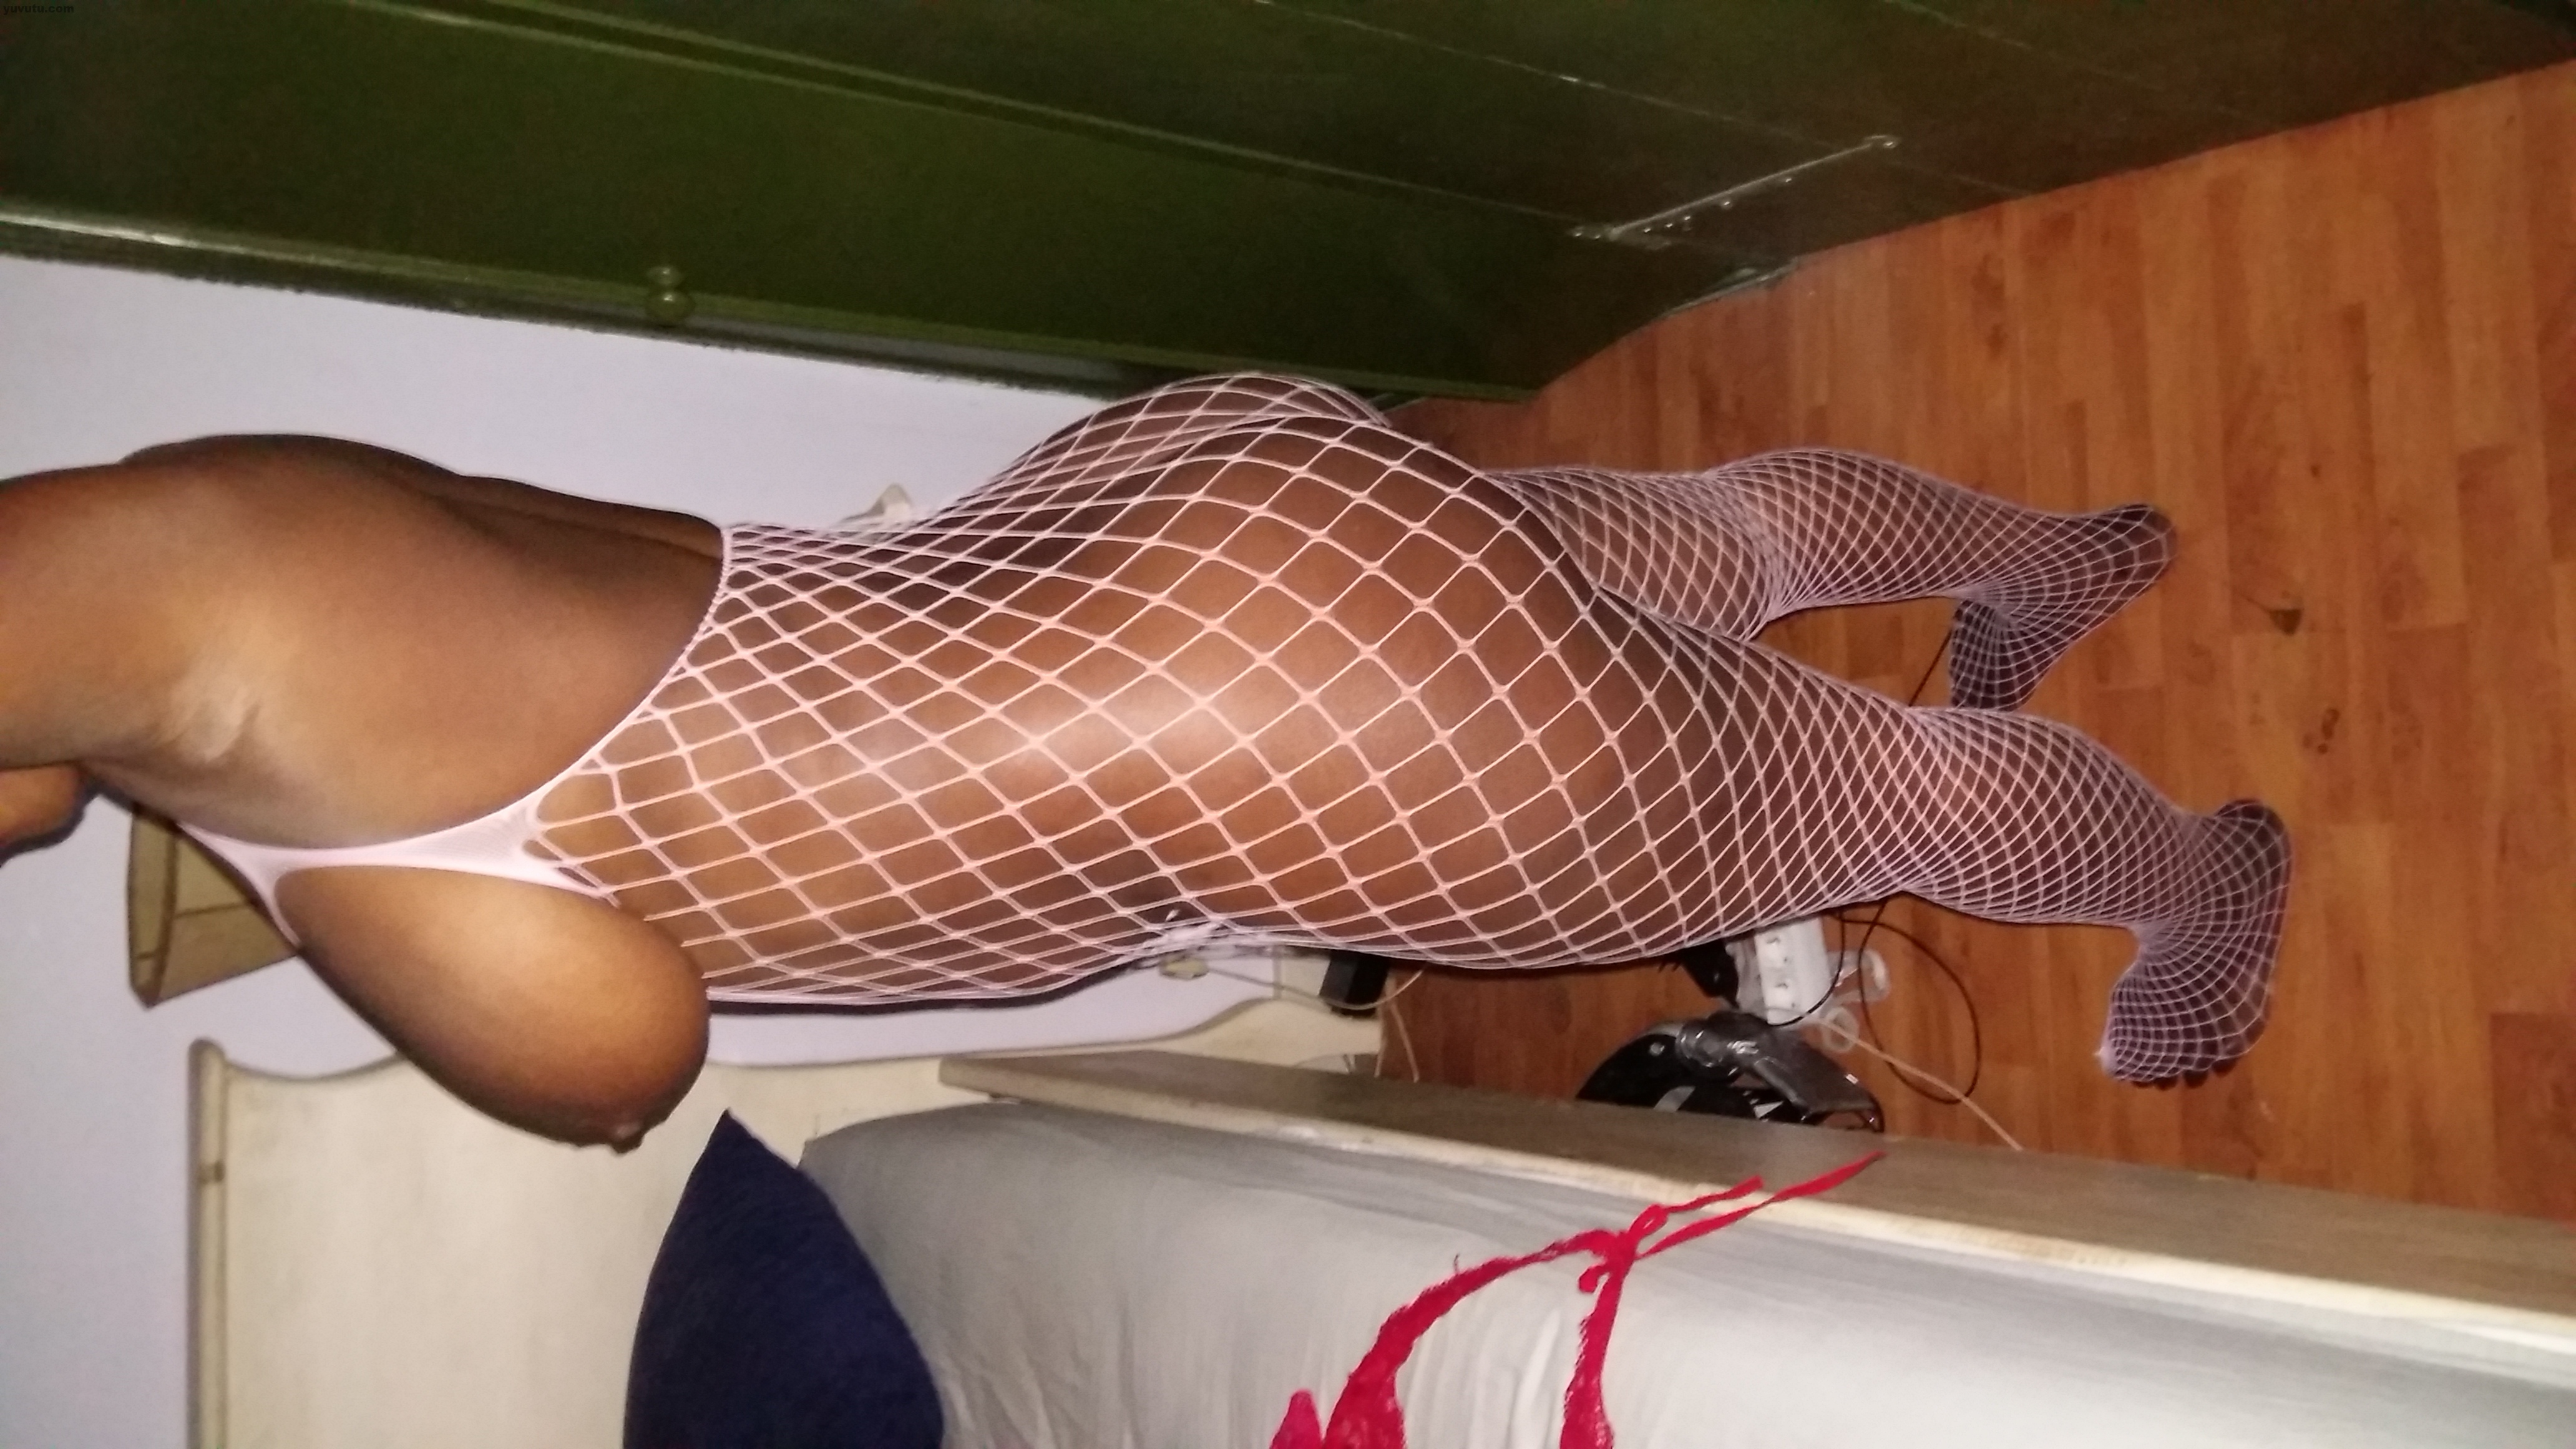 Busty Ebony MILF Ndey in Fishnet Bodystocking On Yuvutu Homemade Amateur Porn Movies And XXX Sex Videos pic